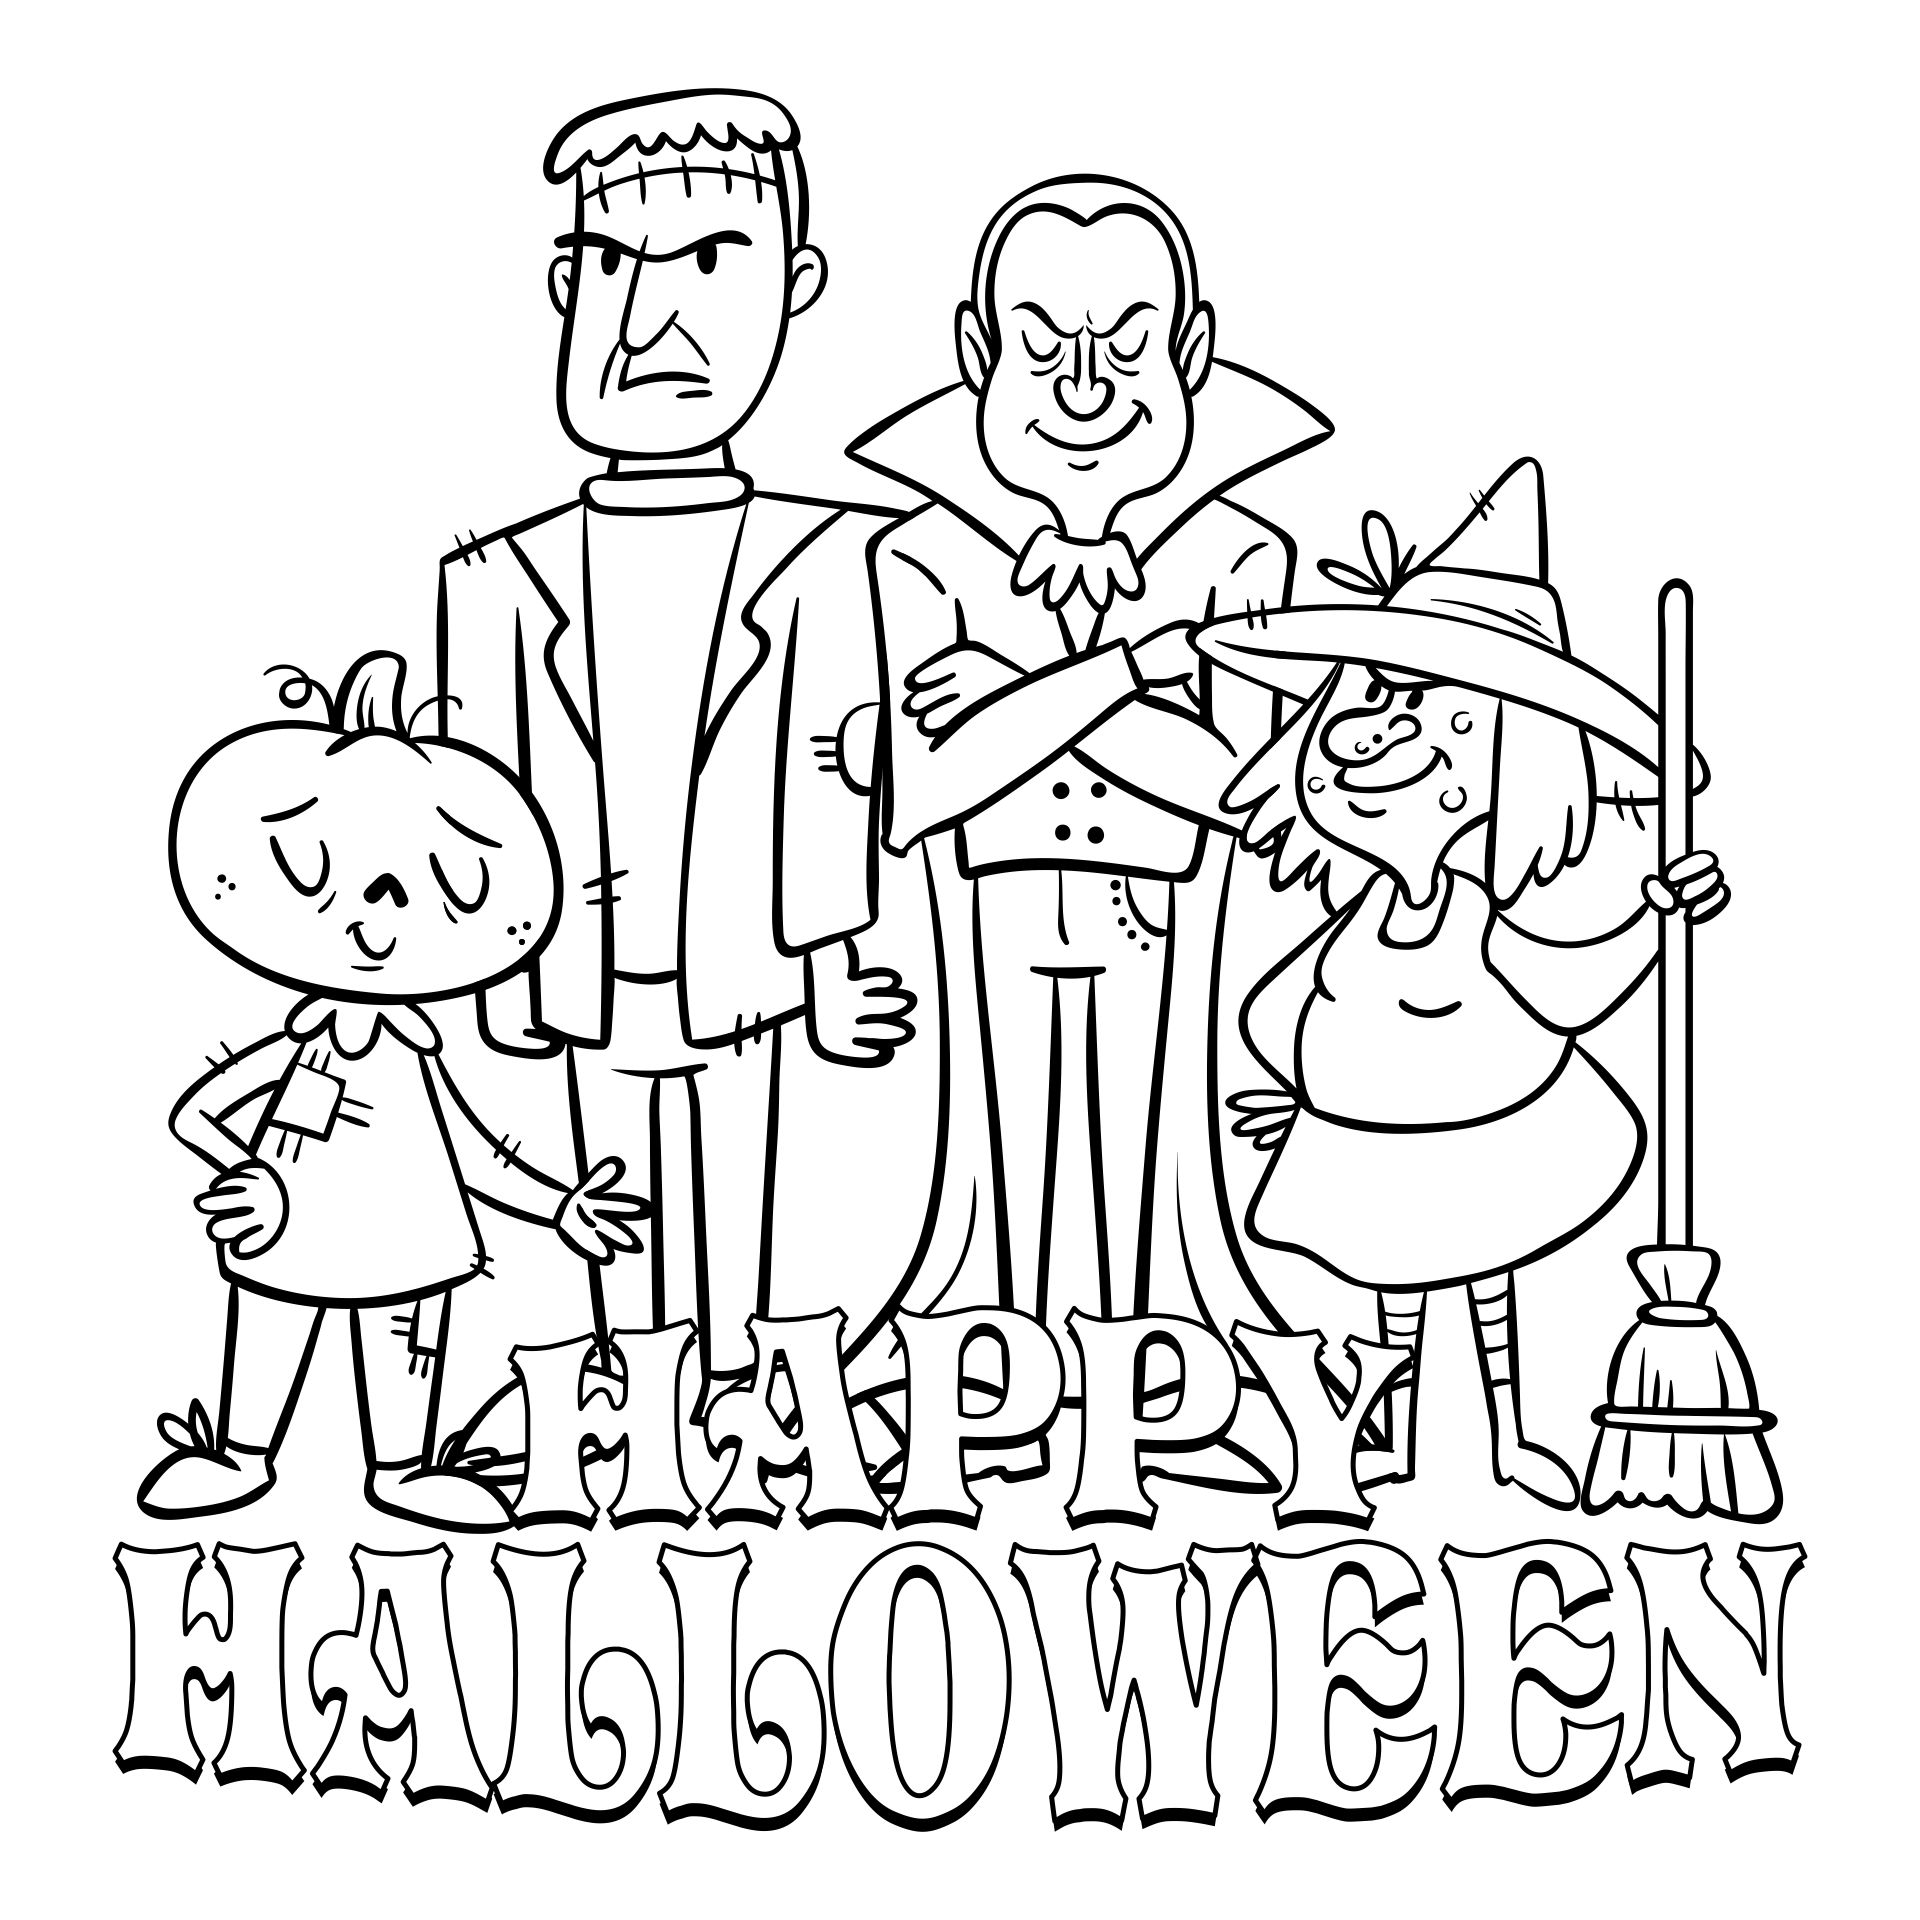 Halloween Characters Coloring Page Printable